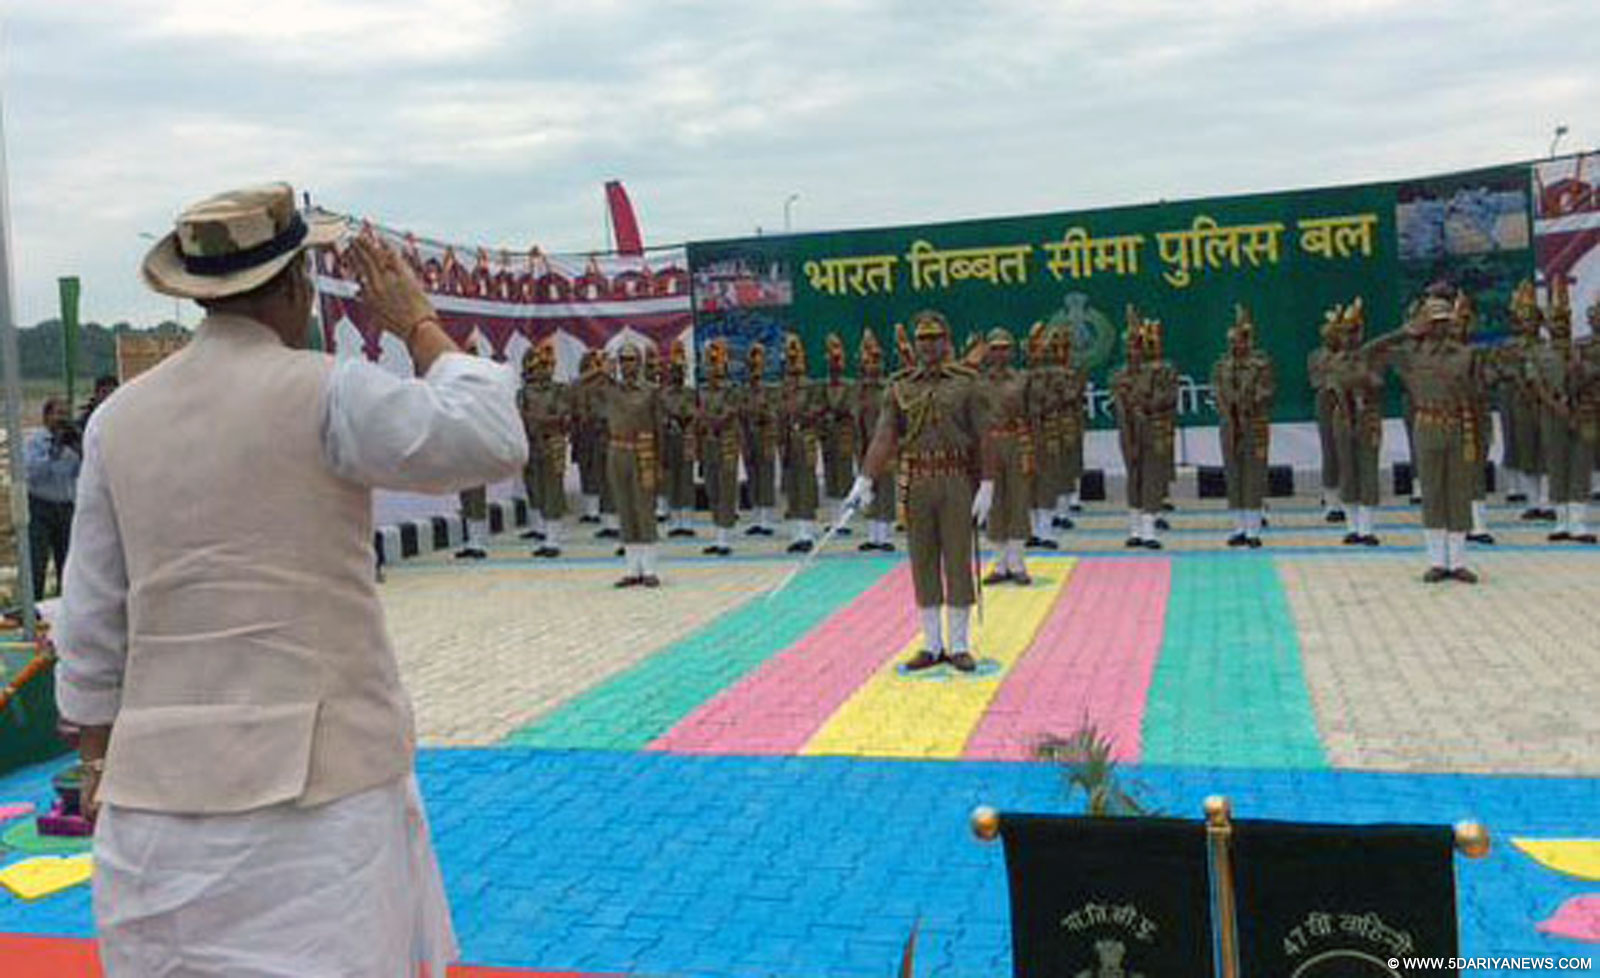 The Union Home Minister, Shri Rajnath Singh inspecting the Guard of Honour, at ITBP Camp, in Samba sector, Jammu and Kashmir on September 21, 2015.